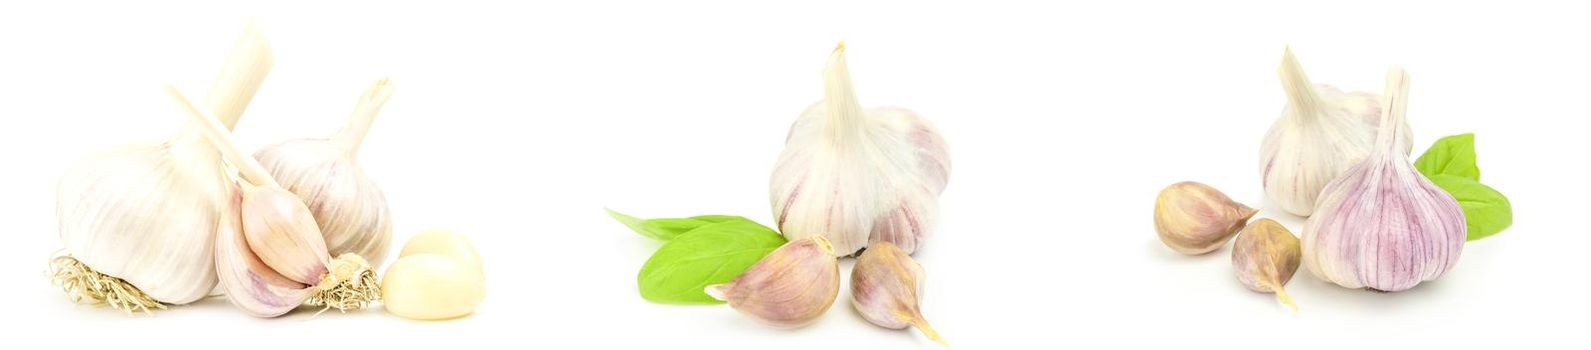 Set of Garlic isolated on a white background cutout